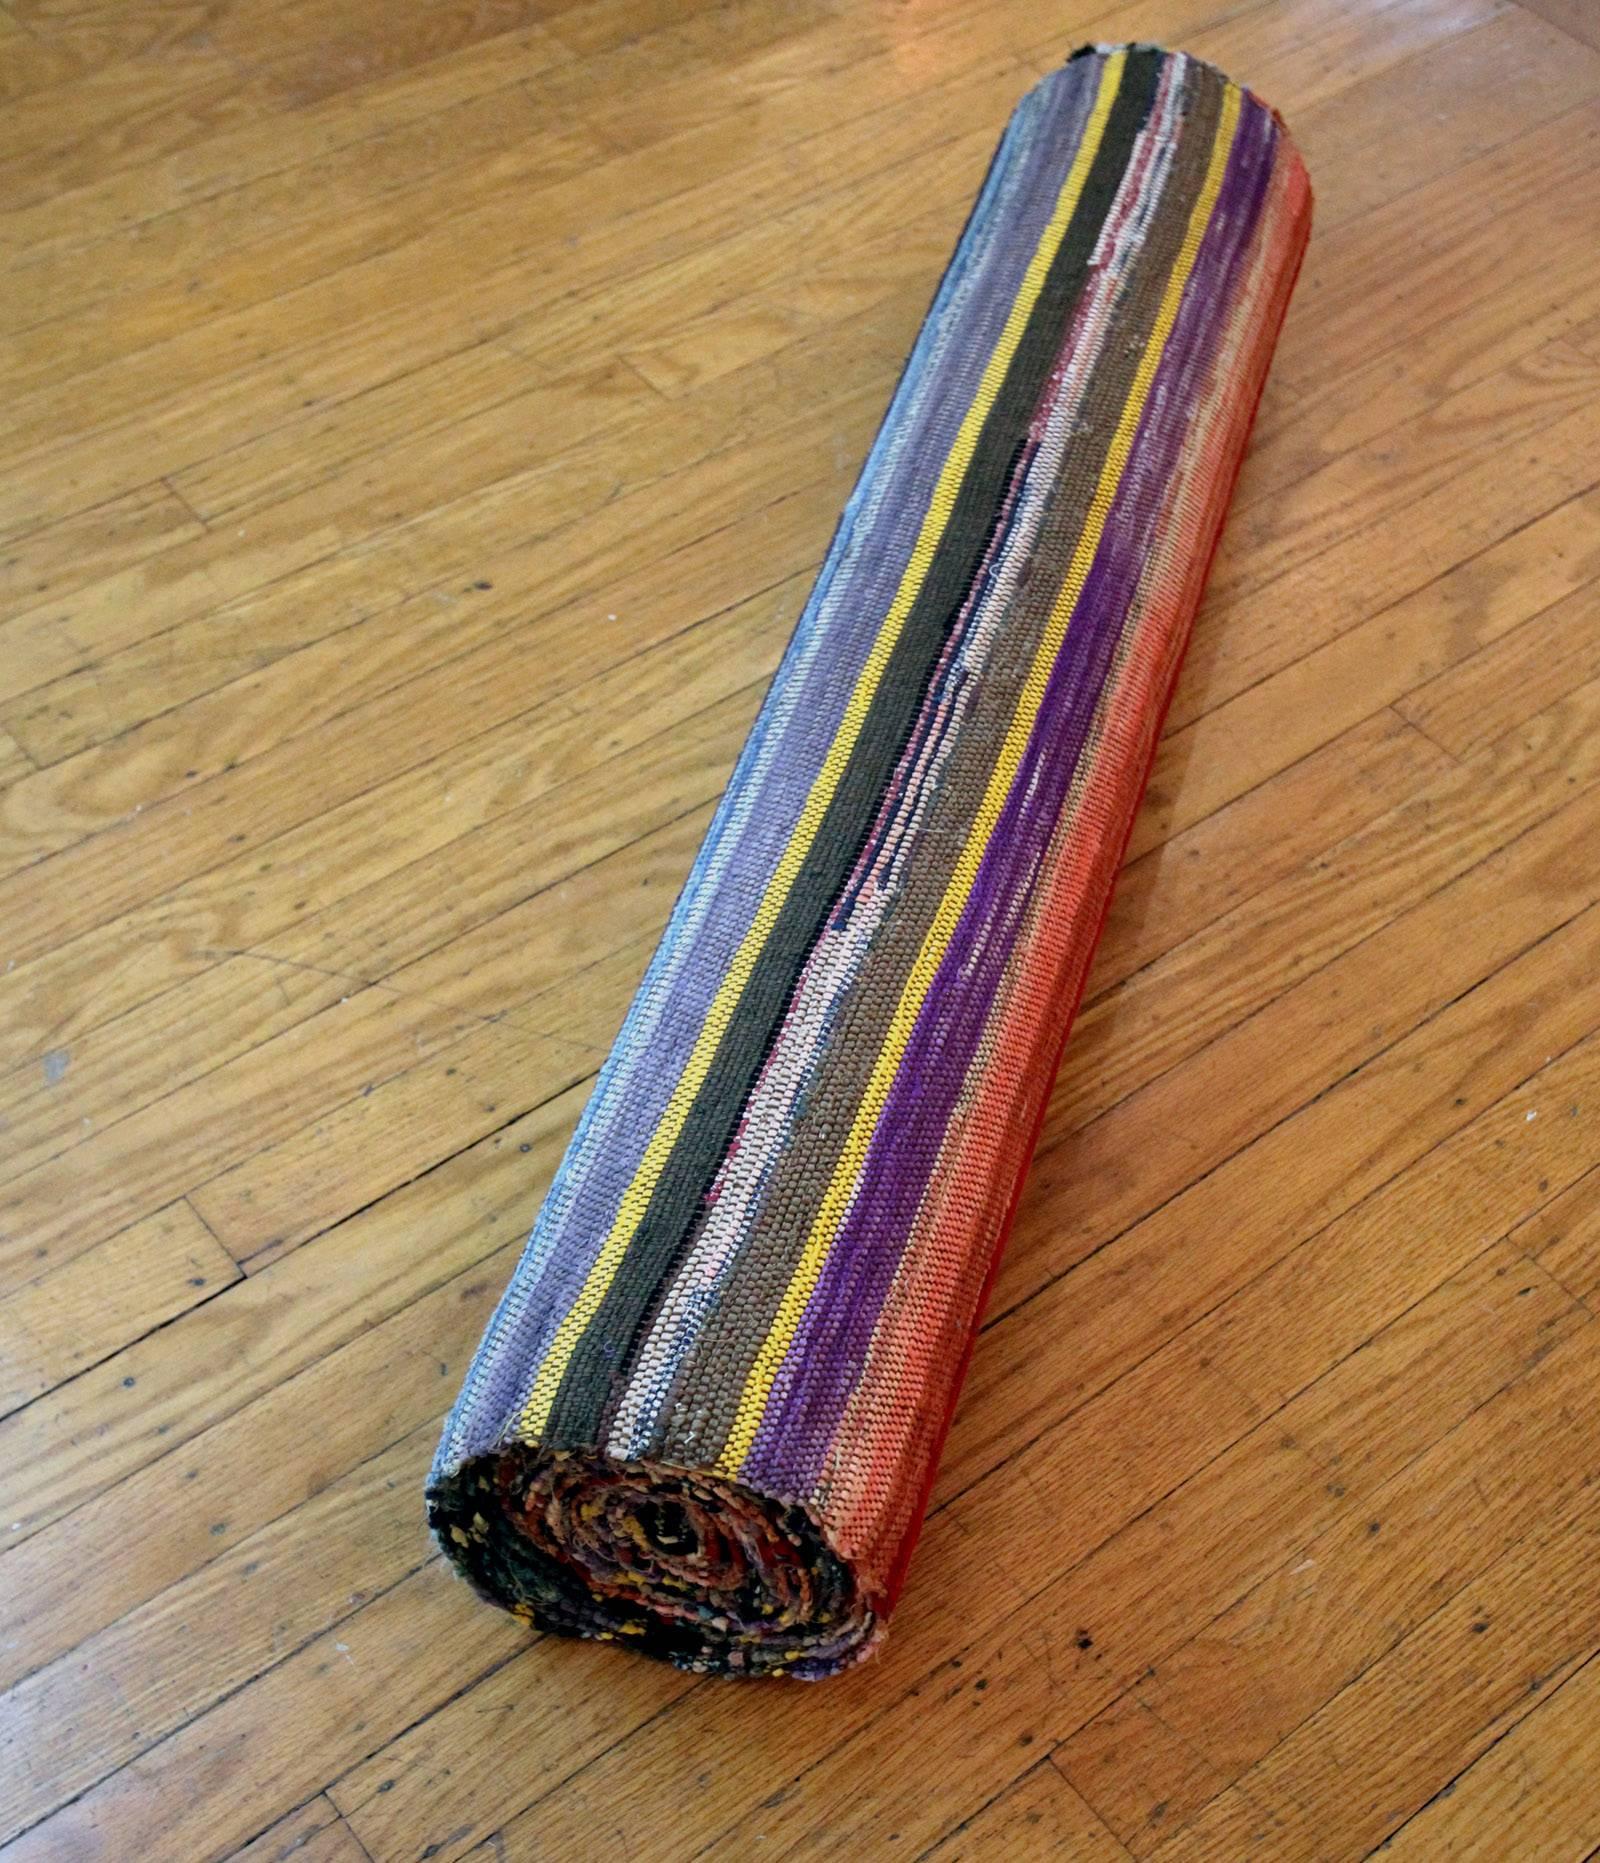 Versatile and mint condition roll of hand-loom woven rag rug (28.5' long), in excellent striped coloration. Width is 34.5